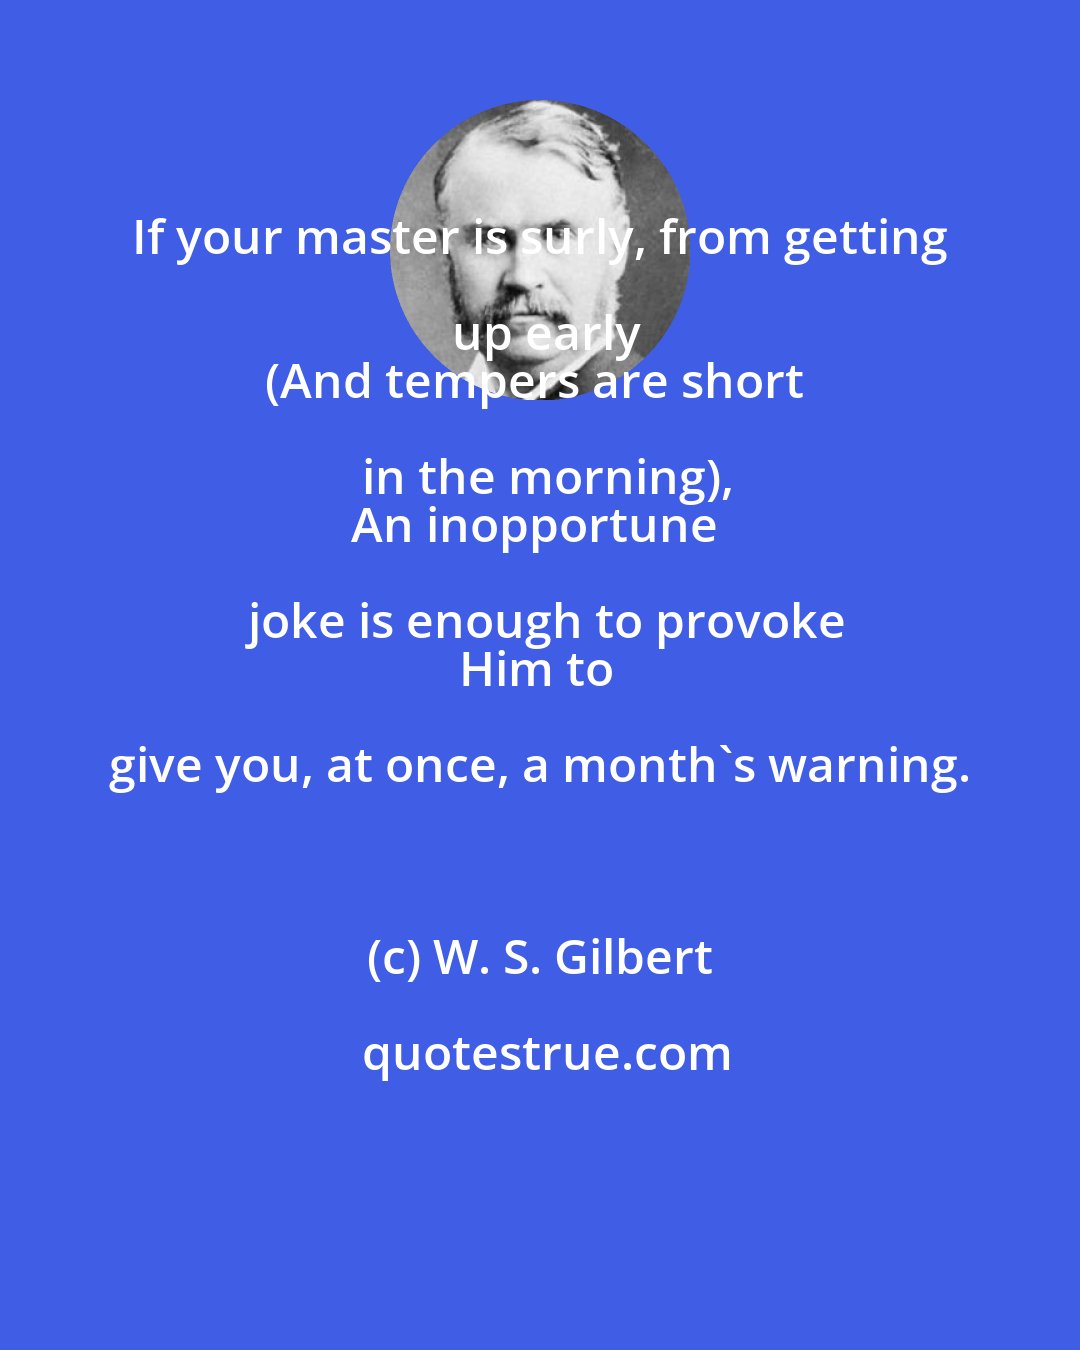 W. S. Gilbert: If your master is surly, from getting up early
(And tempers are short in the morning),
An inopportune joke is enough to provoke
Him to give you, at once, a month's warning.